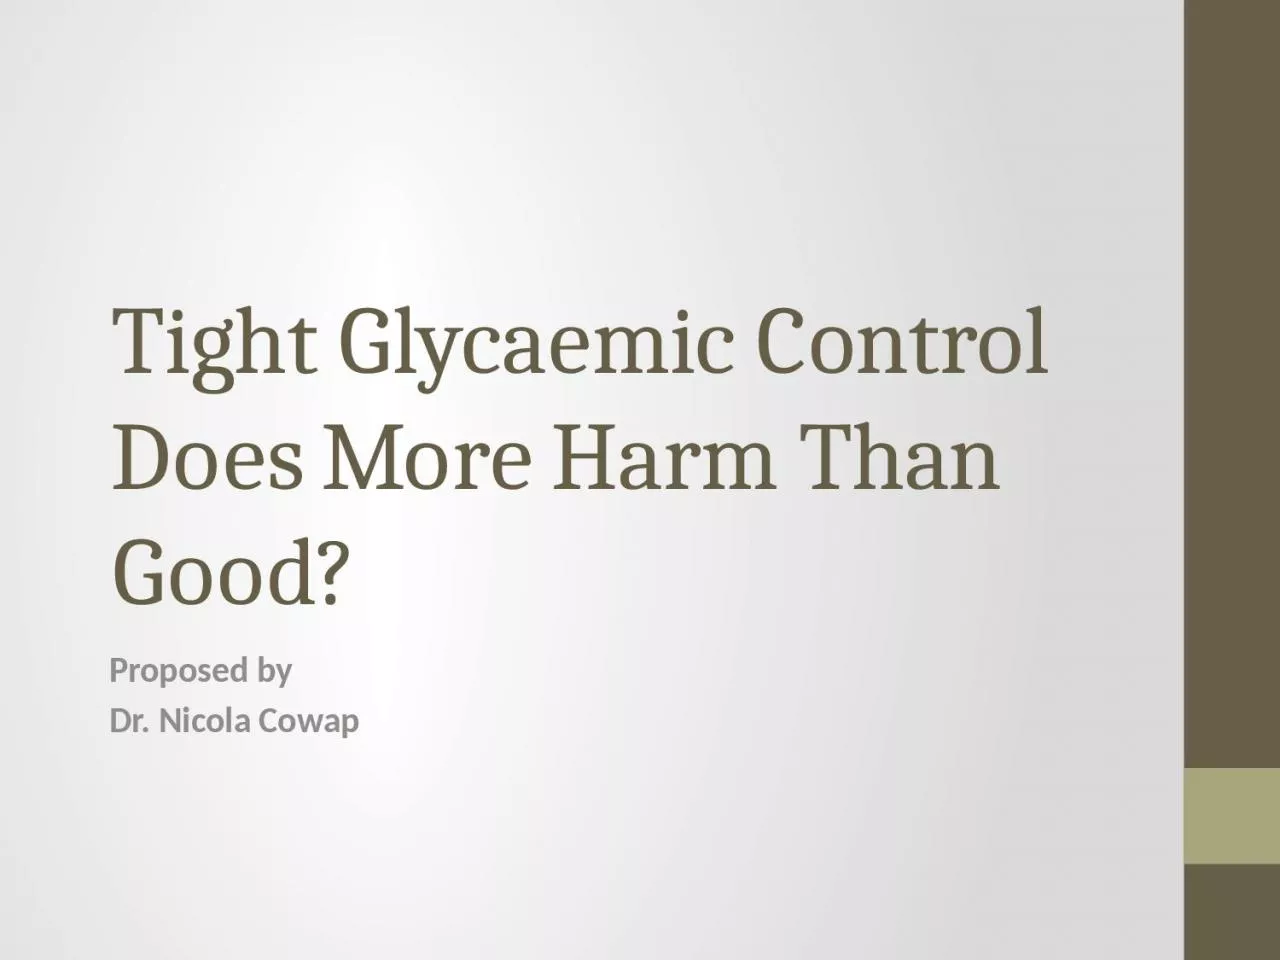 Tight Glycaemic Control Does More Harm Than Good?